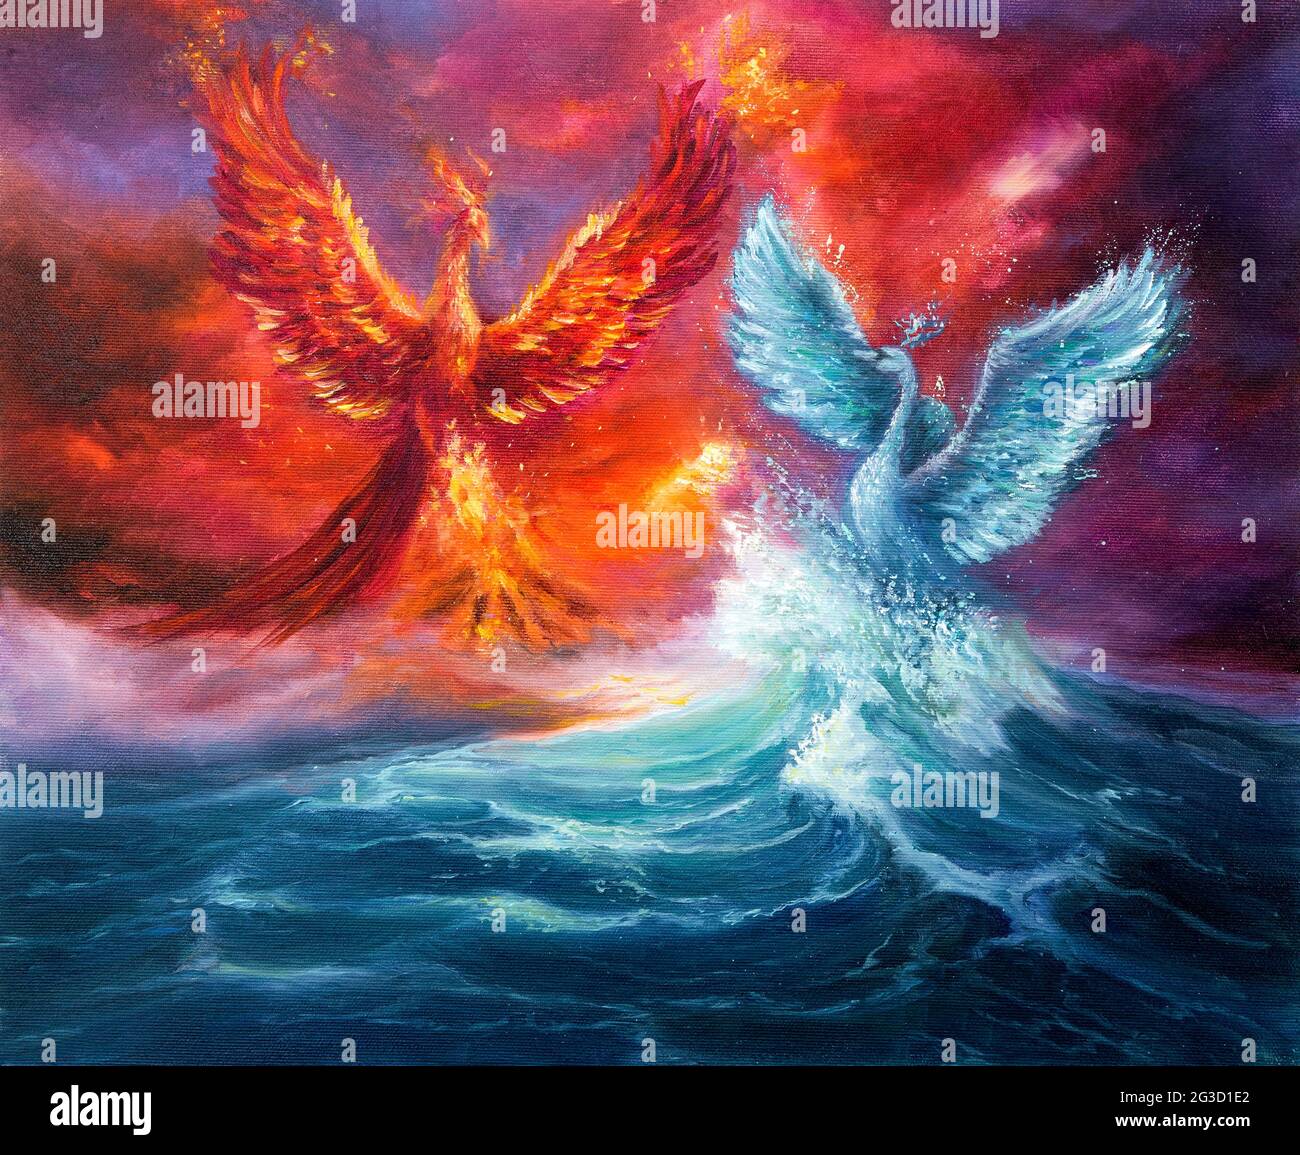 Original Abstract Oil Painting Showing Mythology Phoenix And Spiritual Swan From Waves In Ocean